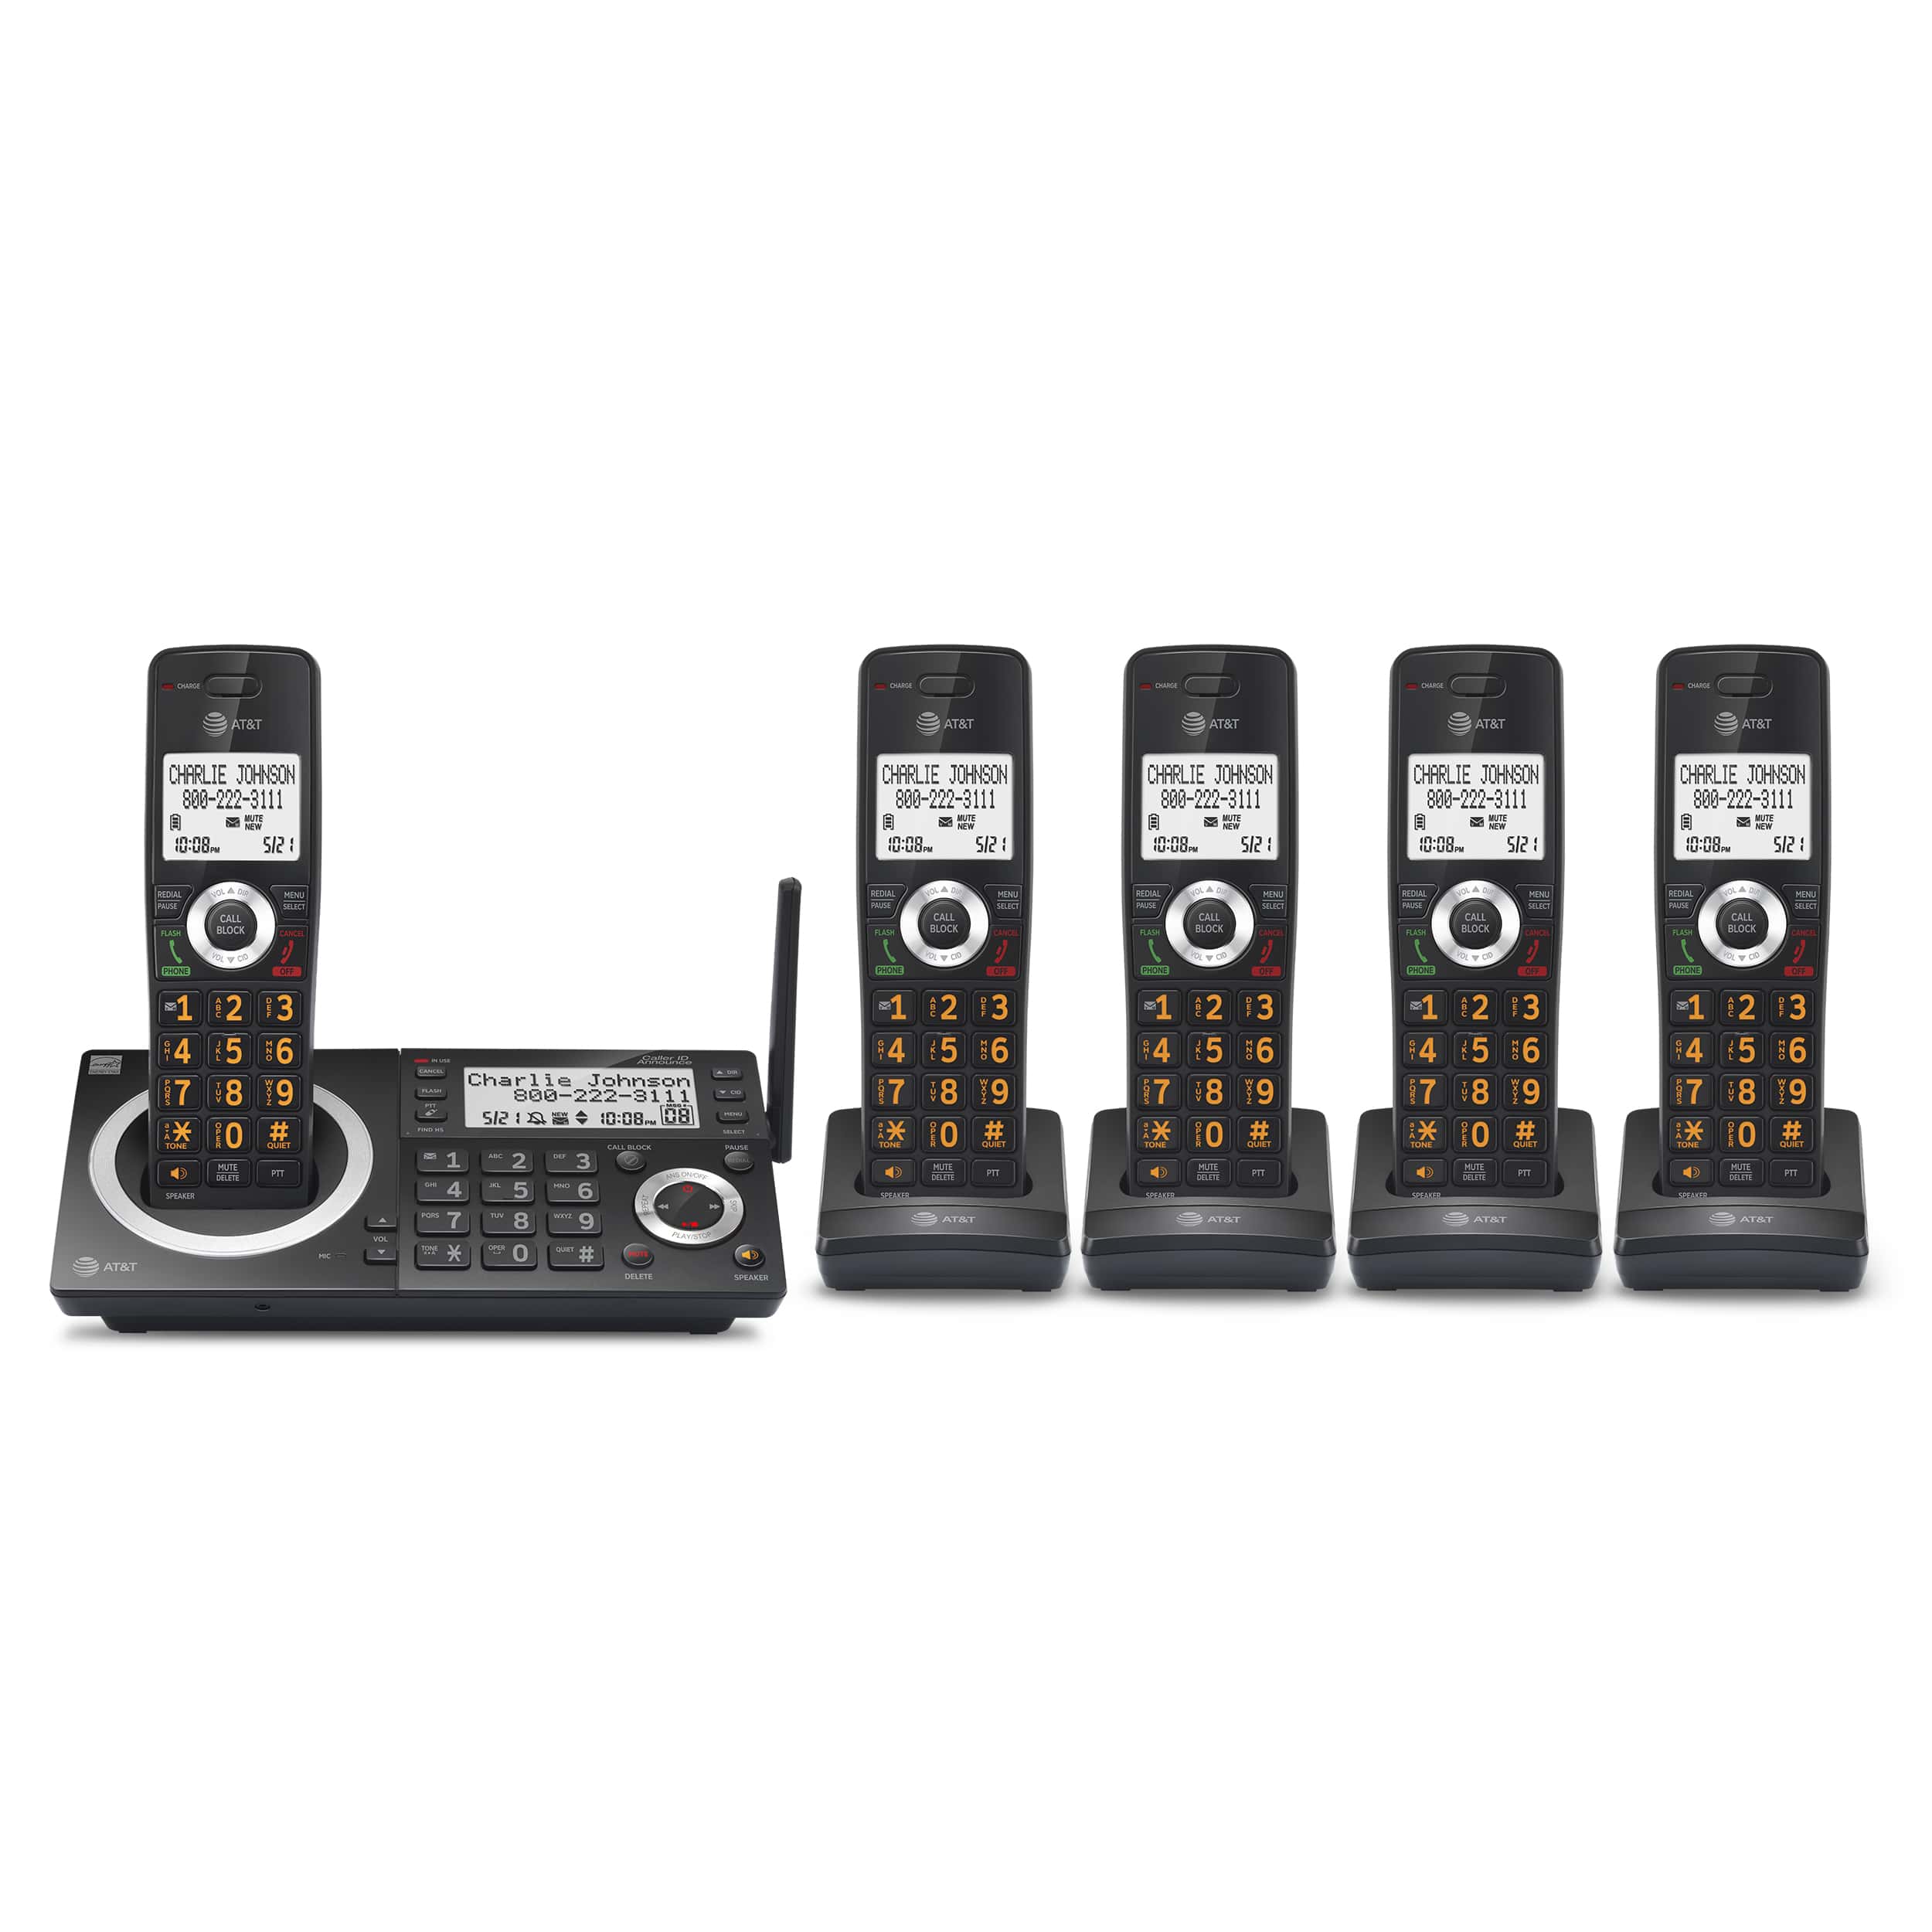 5-Handset Expandable Cordless Phone with Unsurpassed Range, Smart Call Blocker, Dual Keypad and Display, and Answering System - view 1